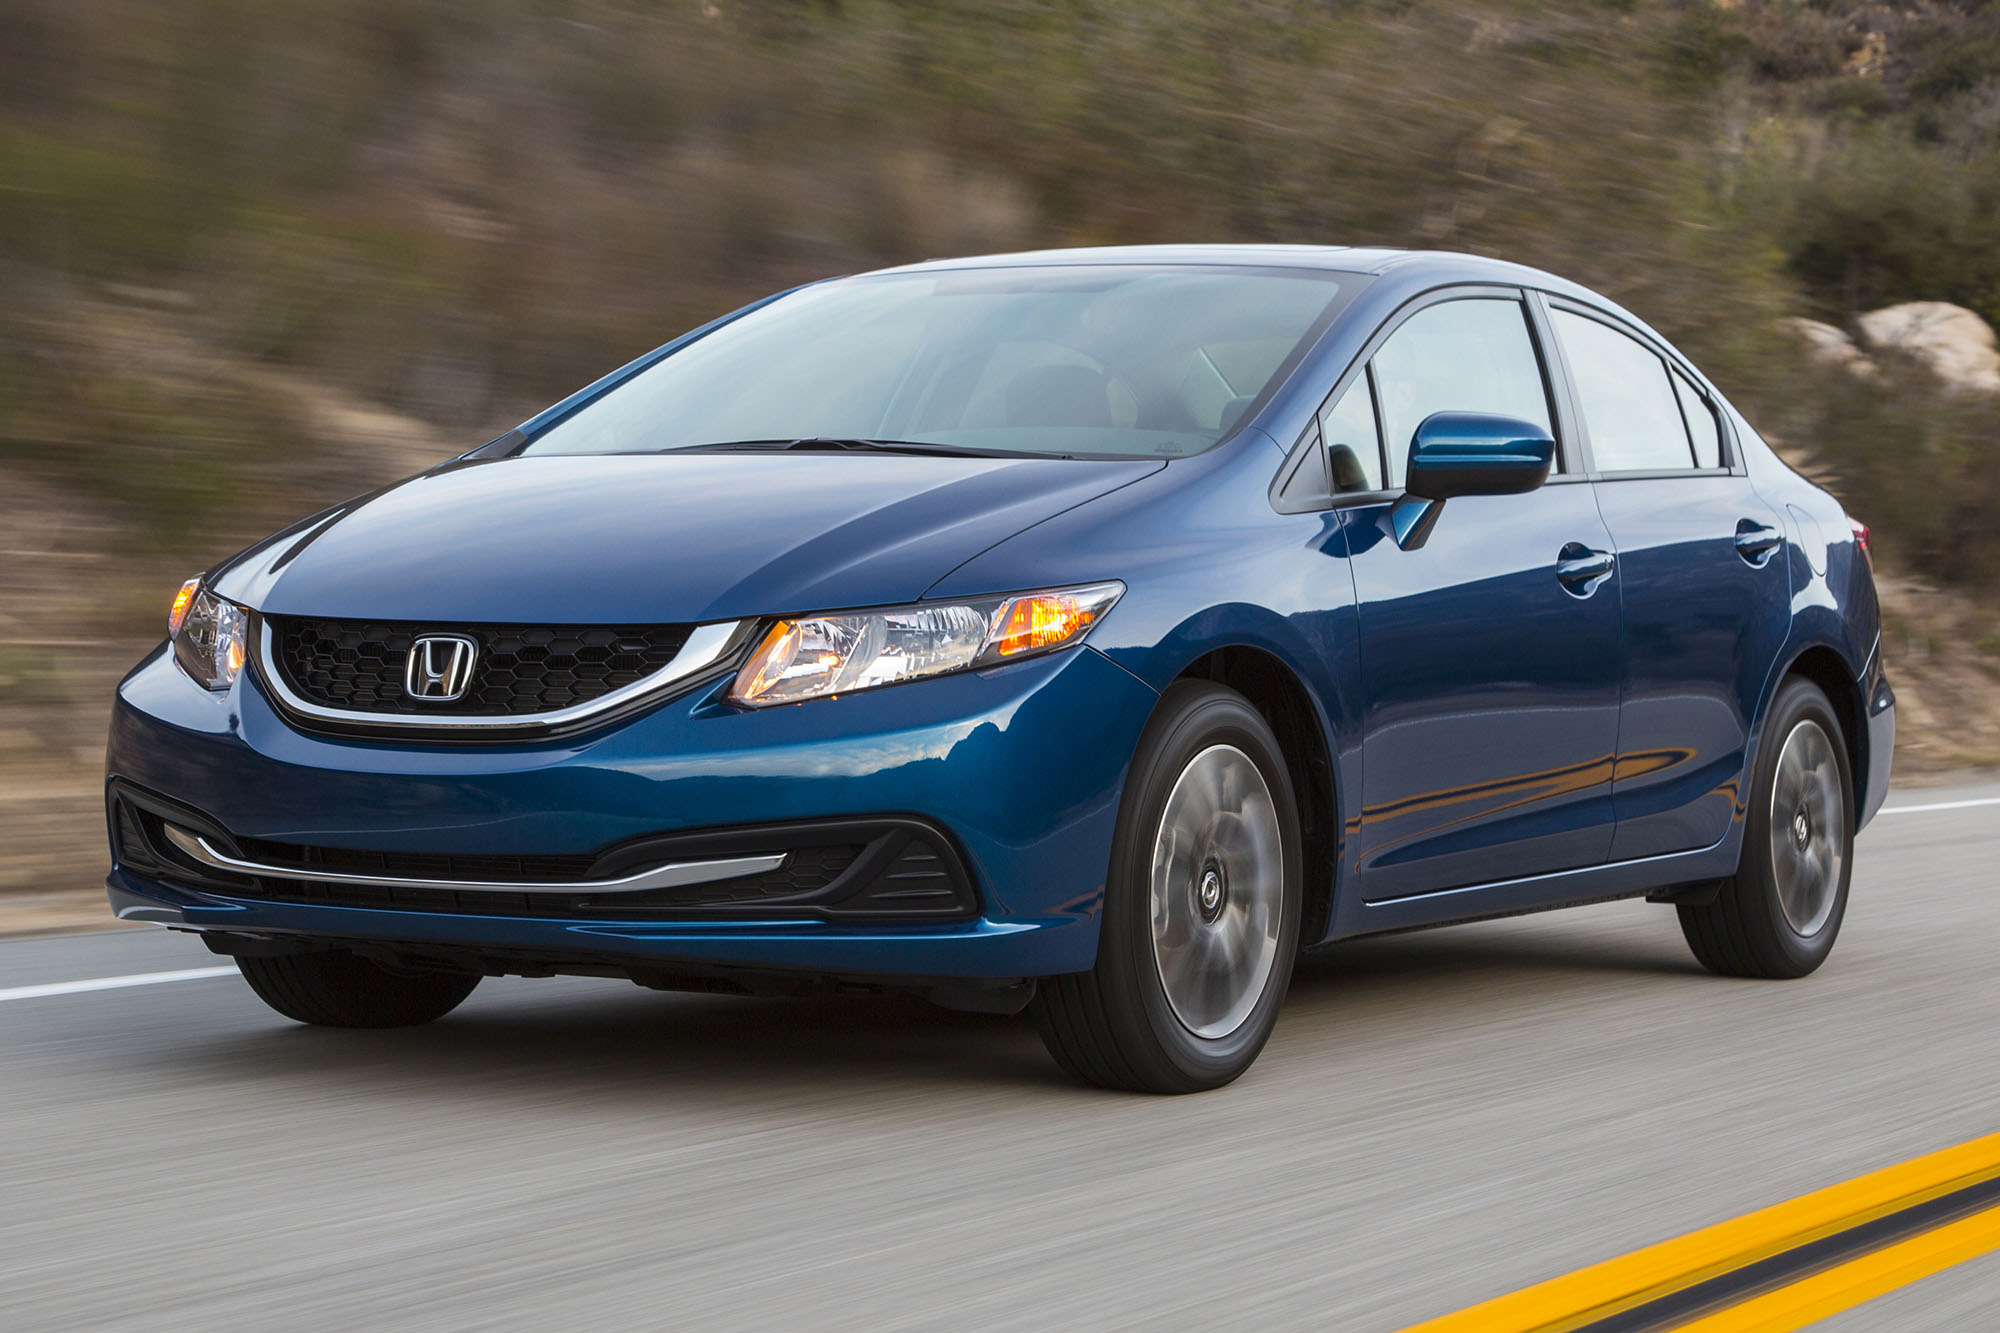 A blue 2014 Honda Civic driving on a highway